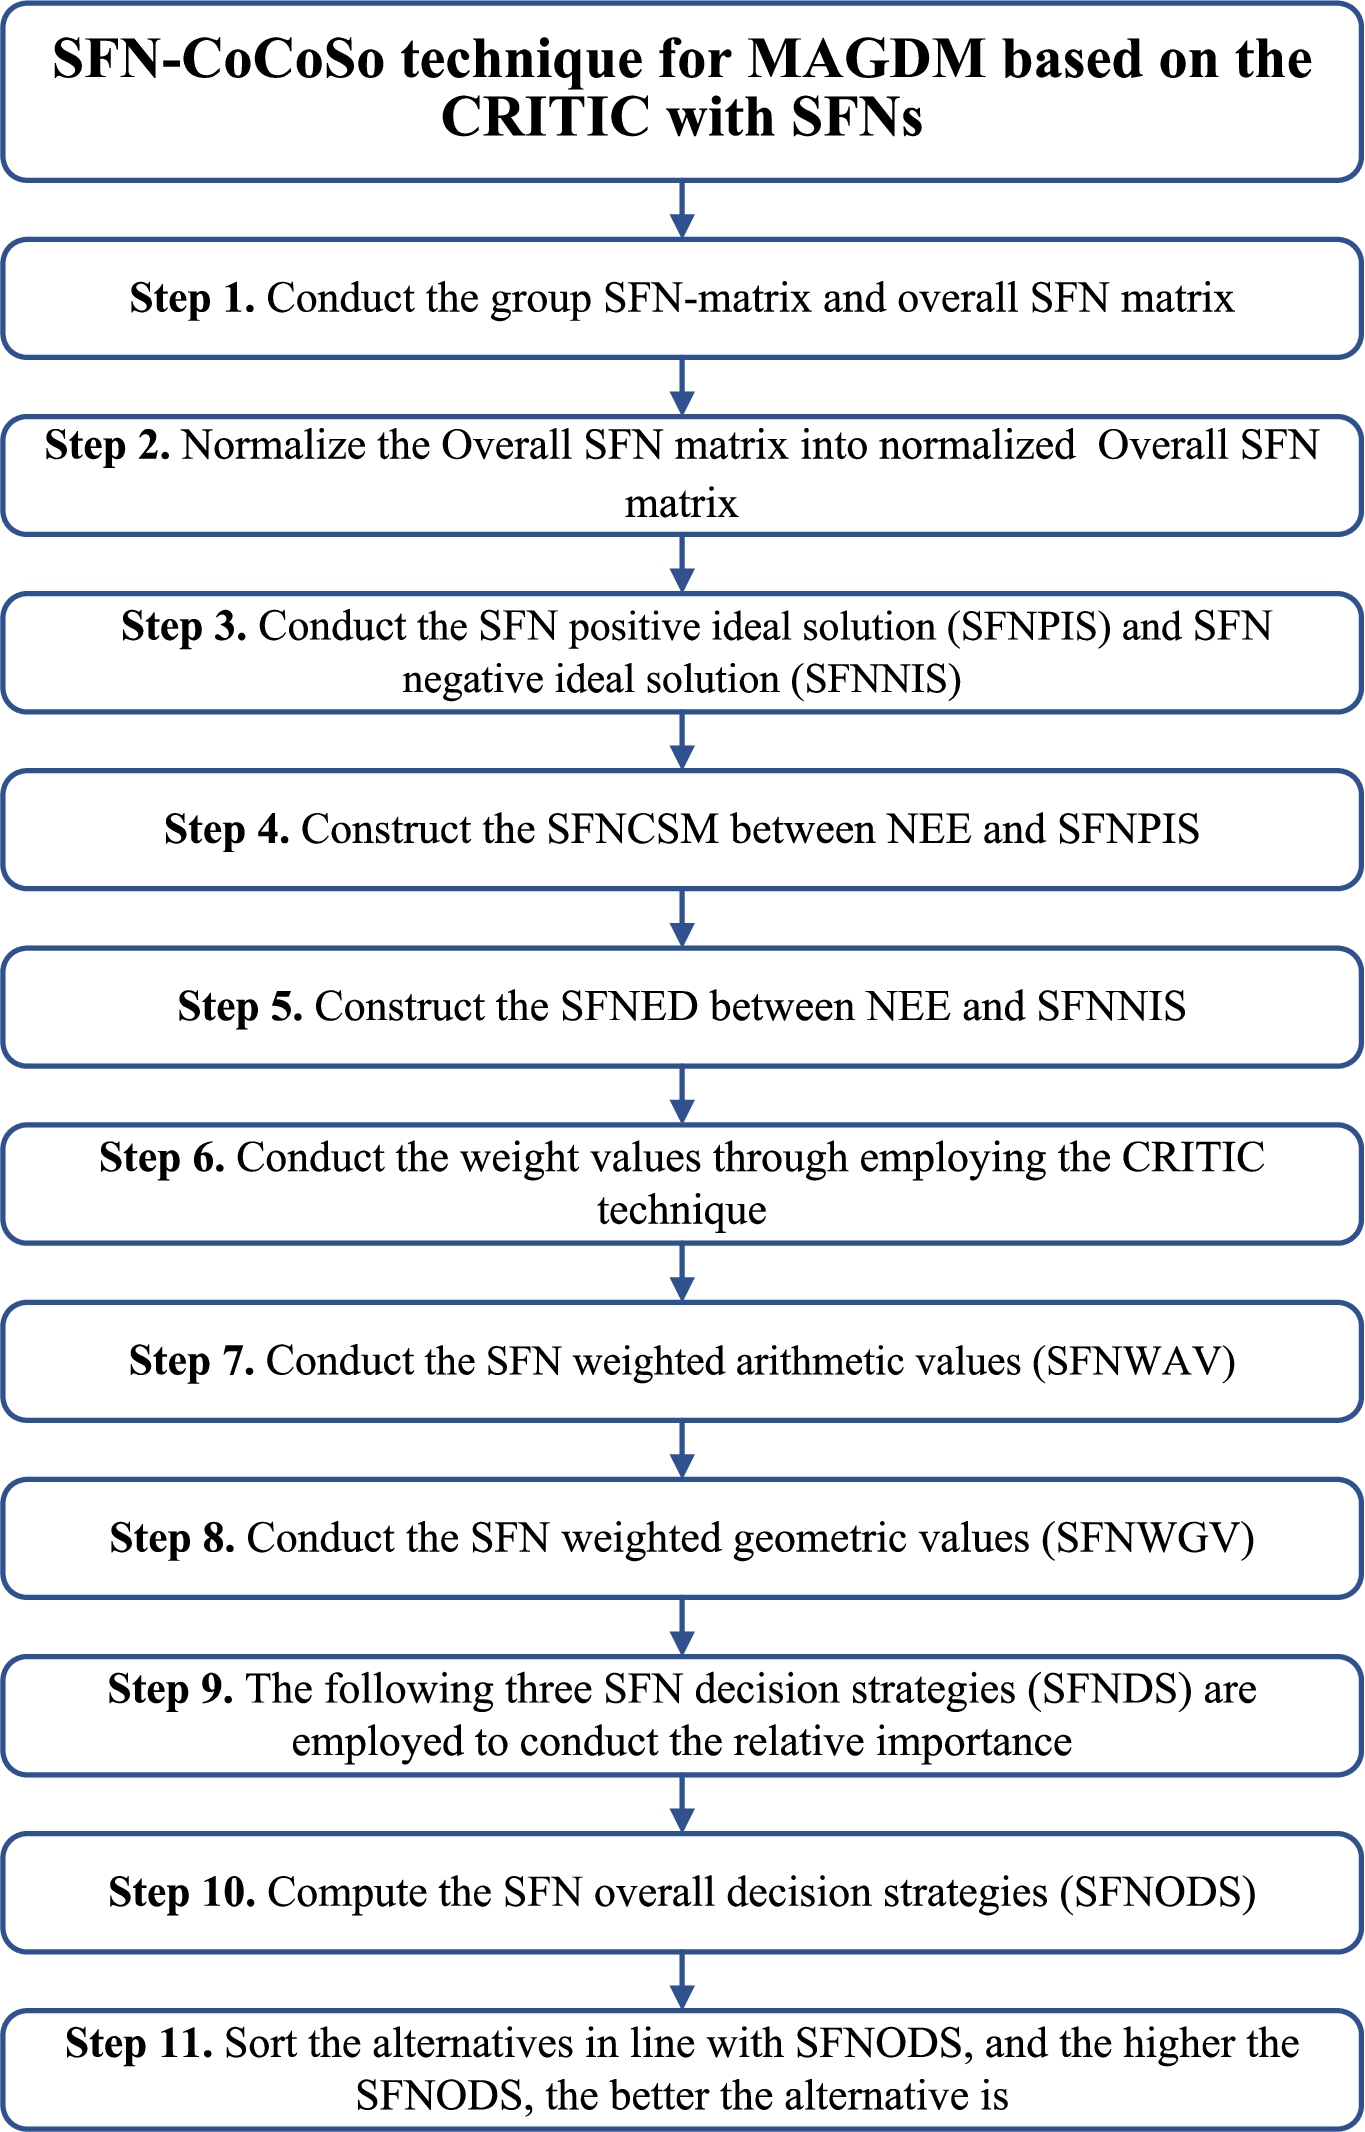 SFN-CoCoSo technique for MAGDM based on the CRITIC with SFNs.